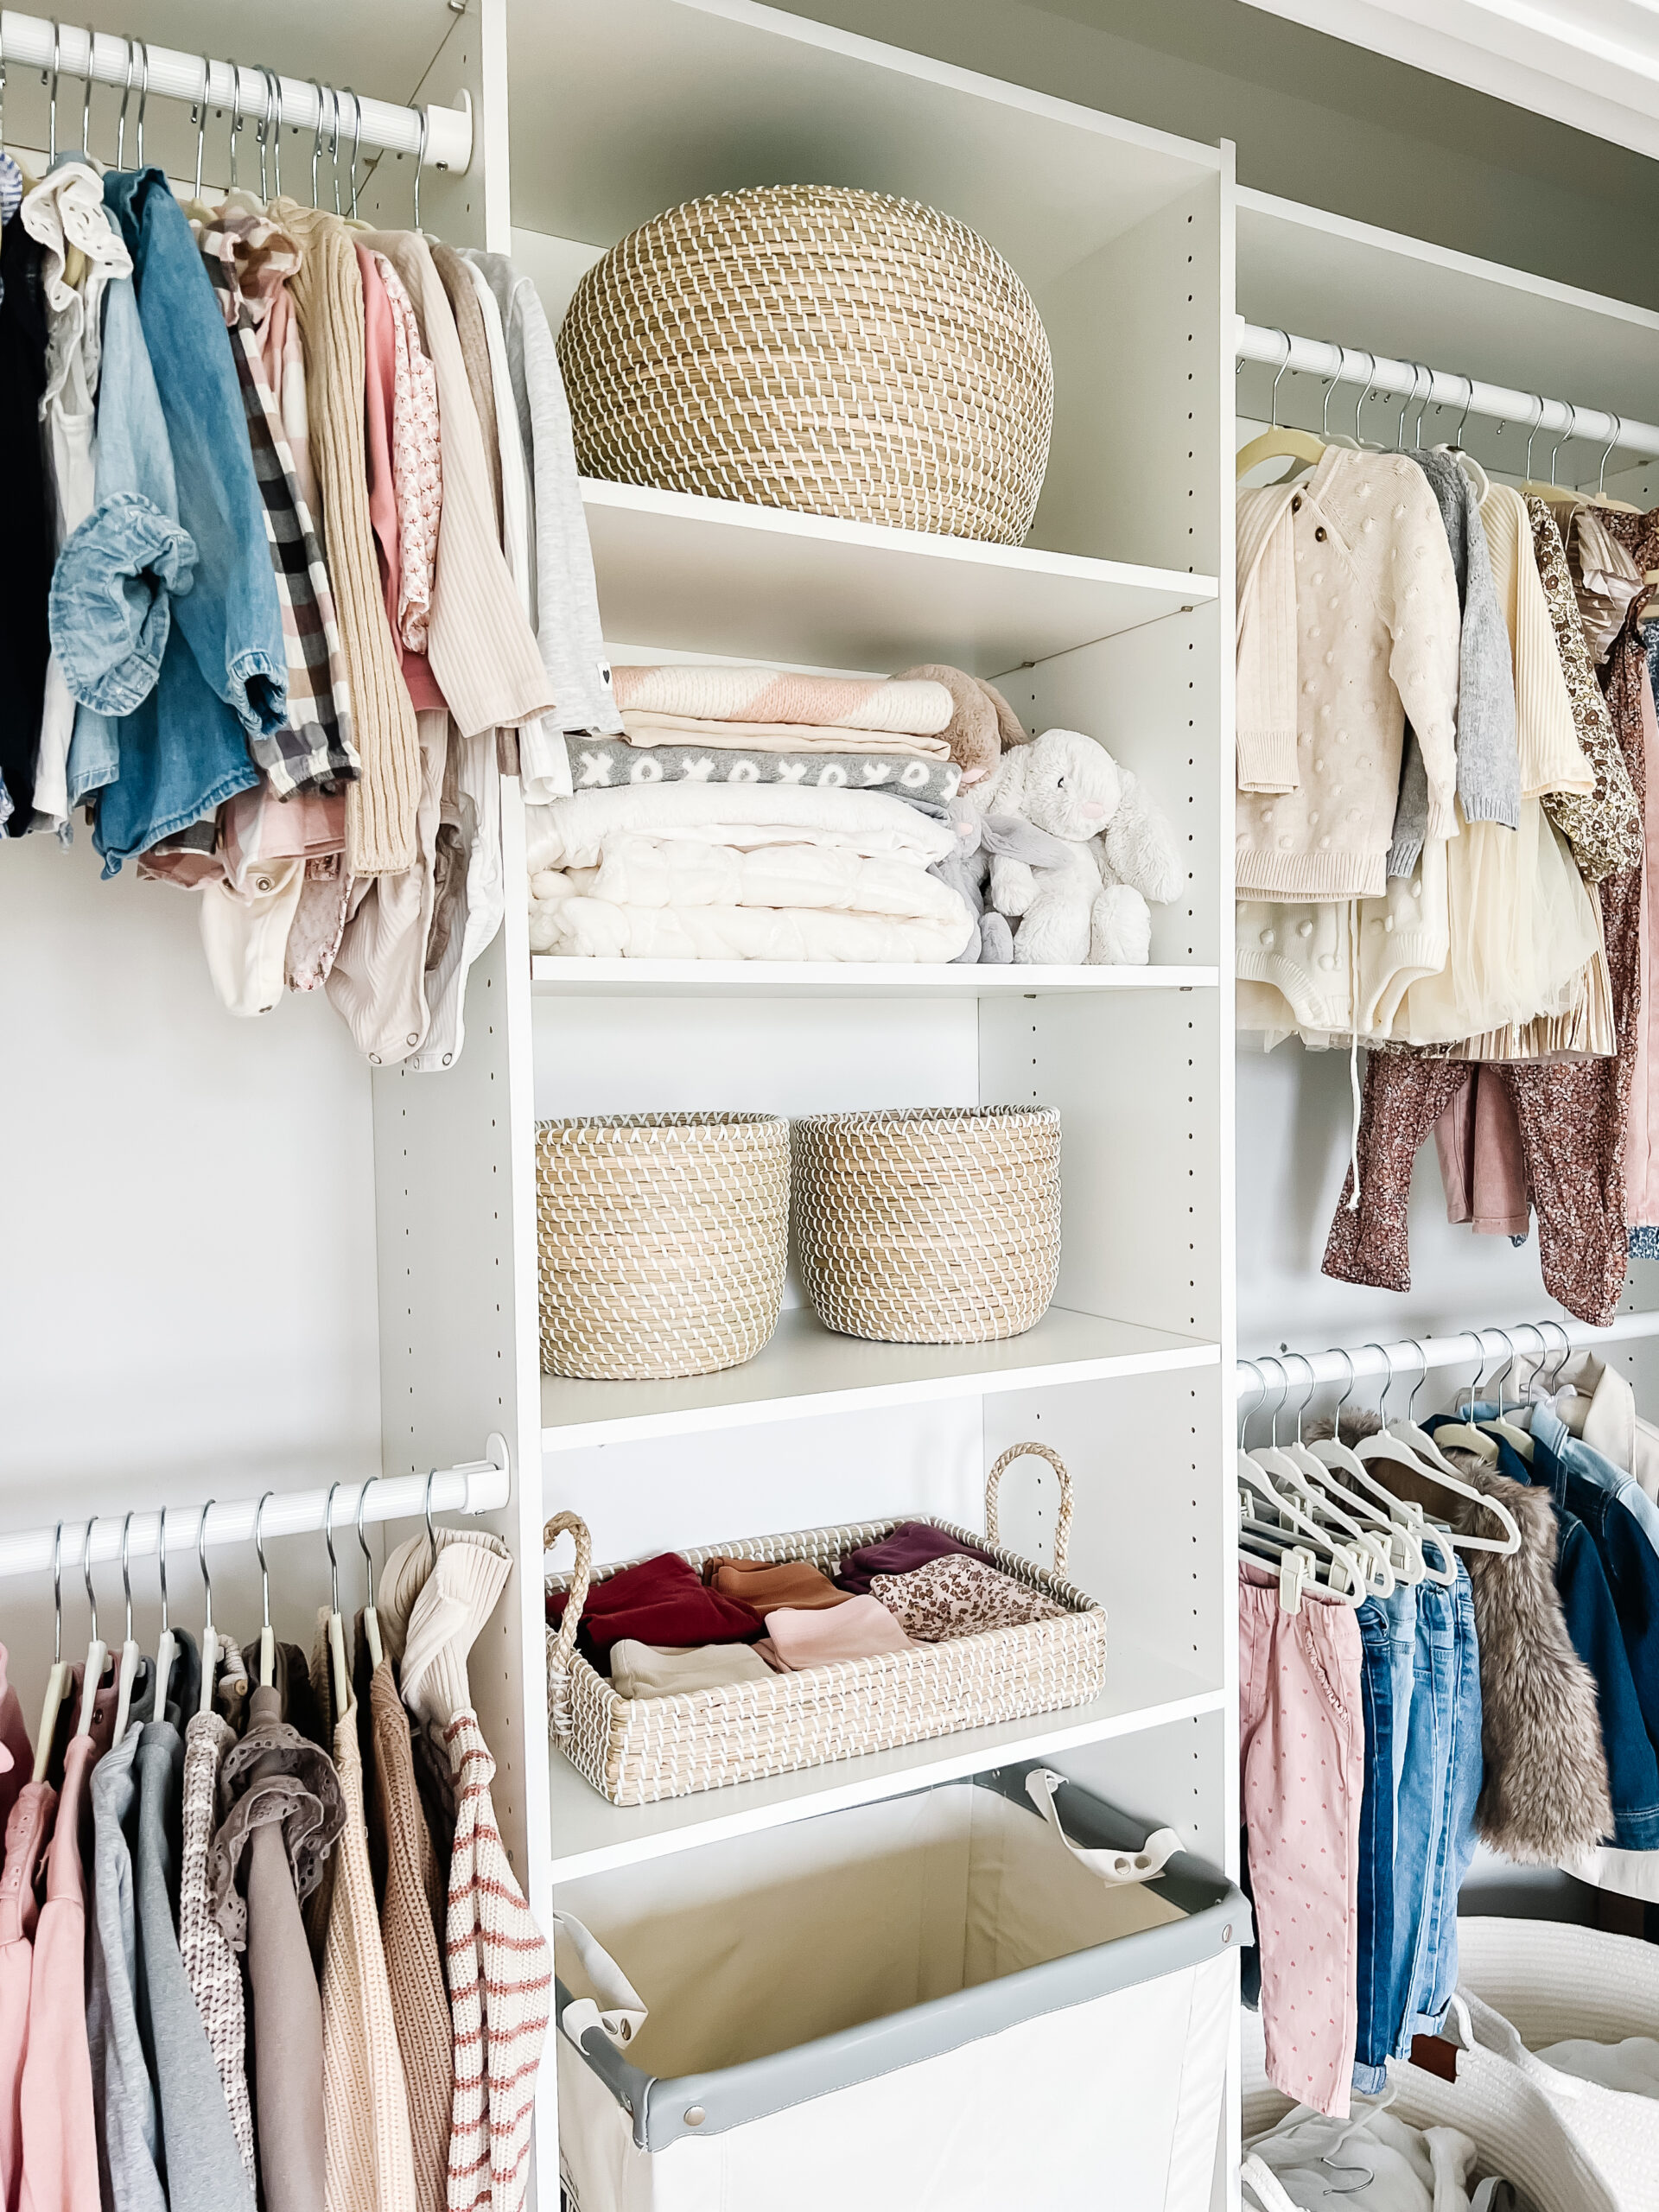 How We Organized the Baby Closet Plus How we Fit It All in a Small